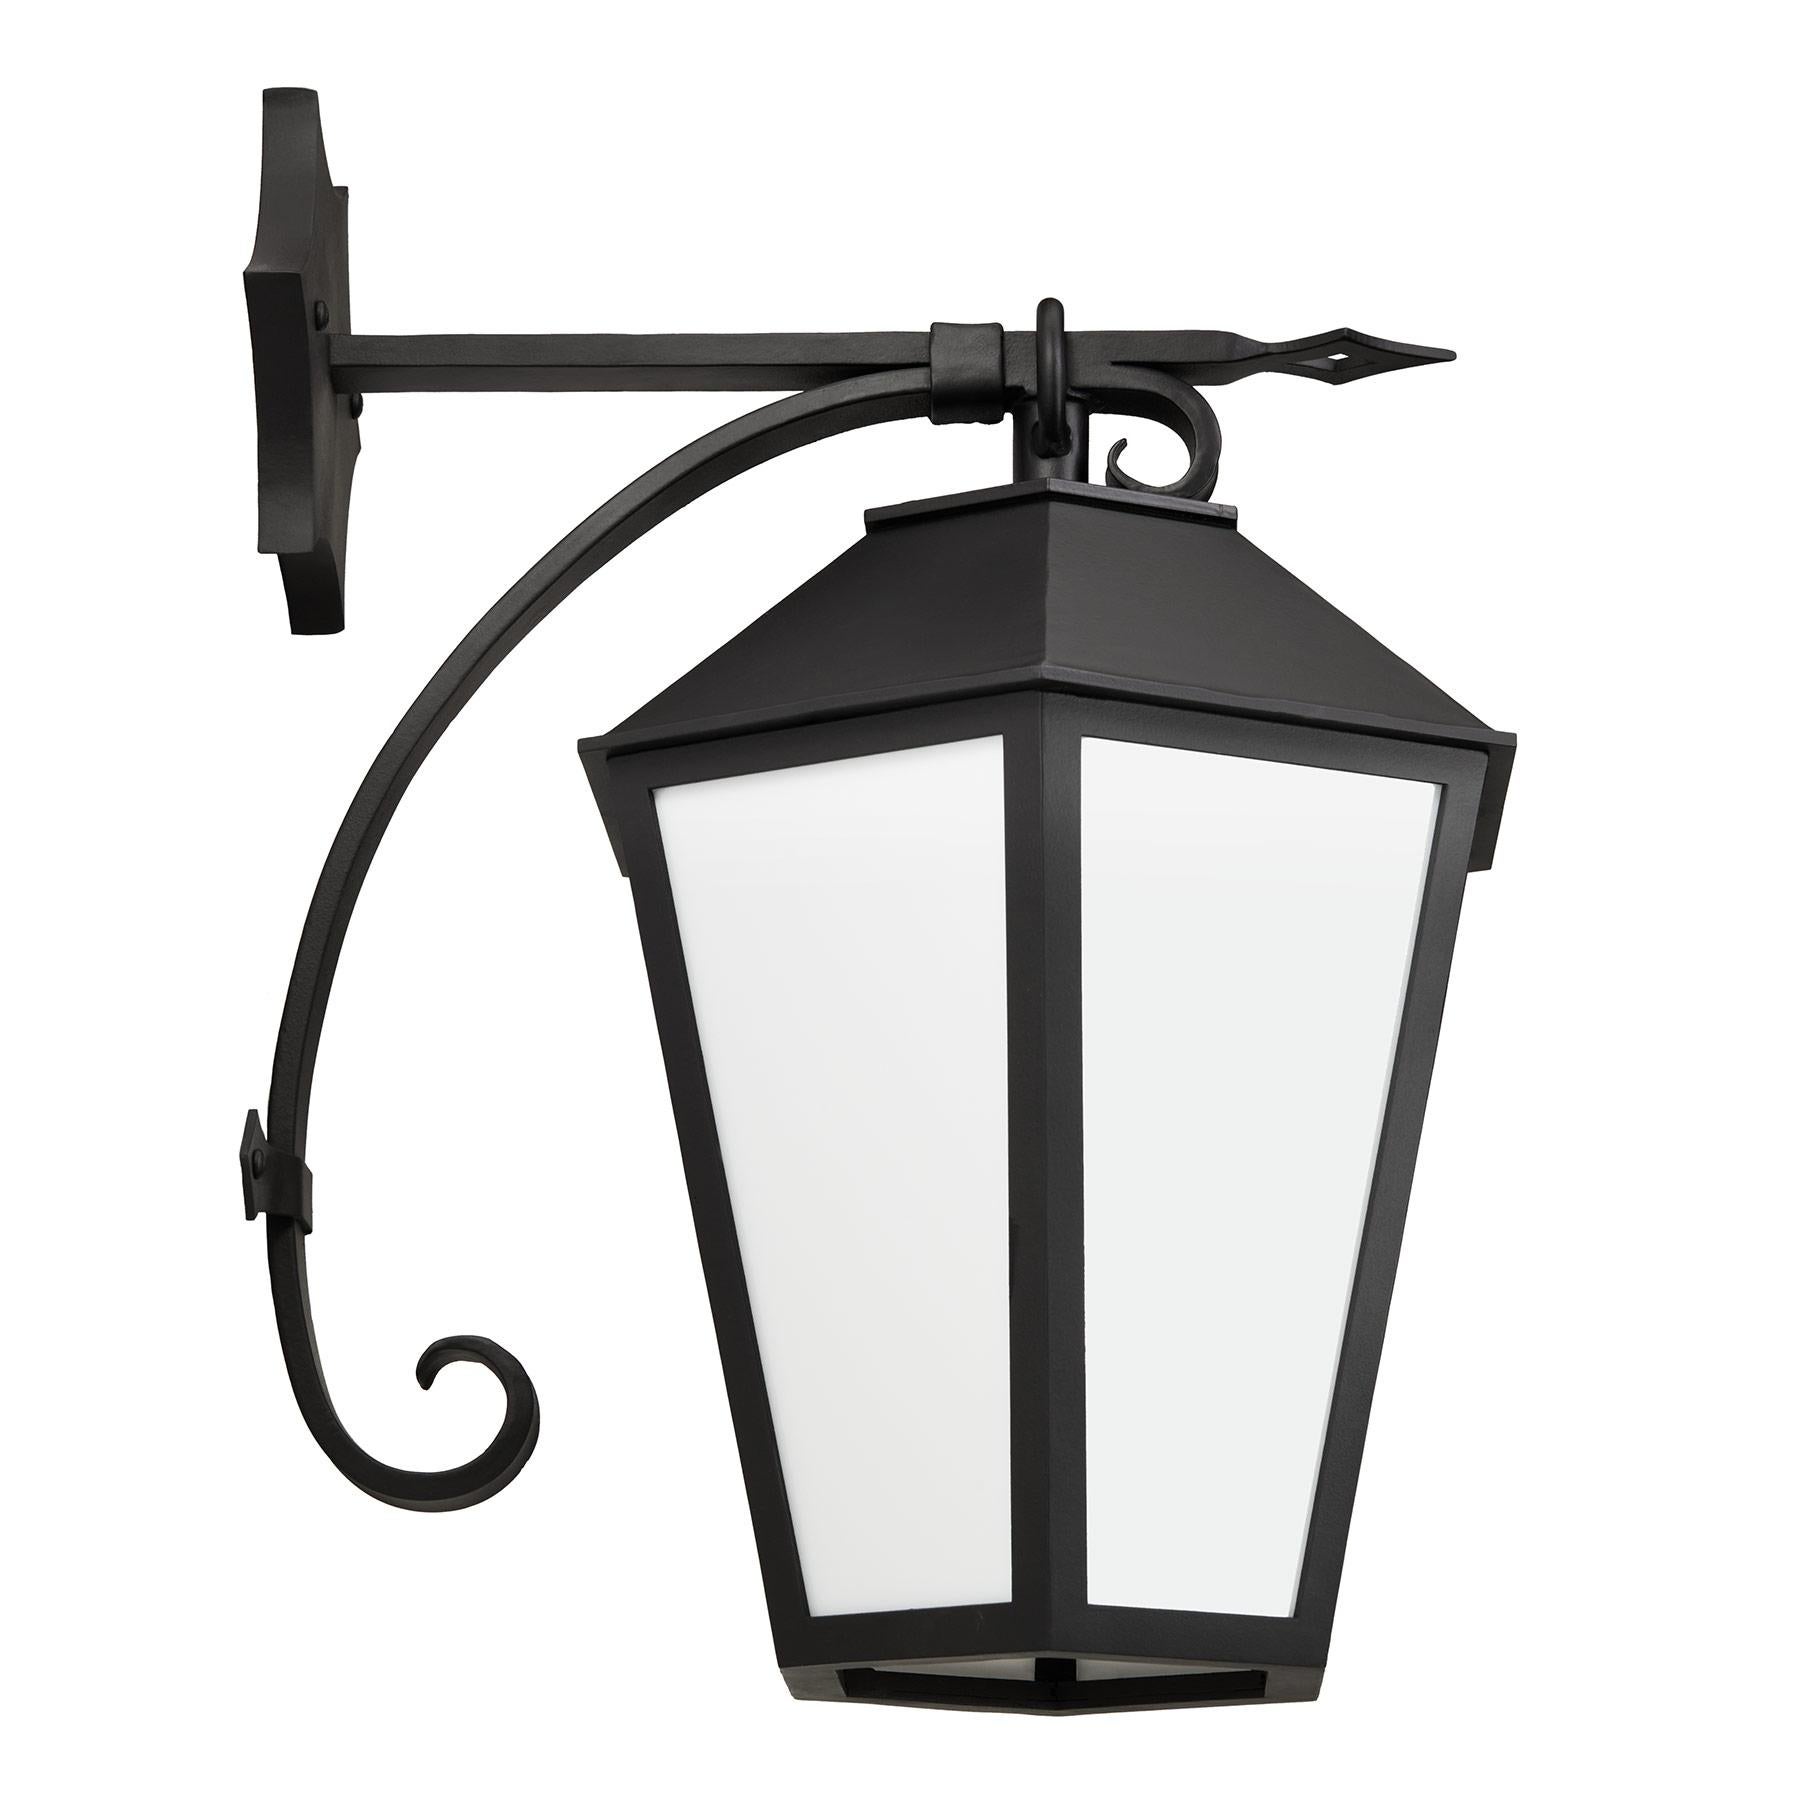 Hand-Painted Spanish Style Wrought Iron Exterior Lantern Wall Mount (Dark Sky Compliant) For Sale